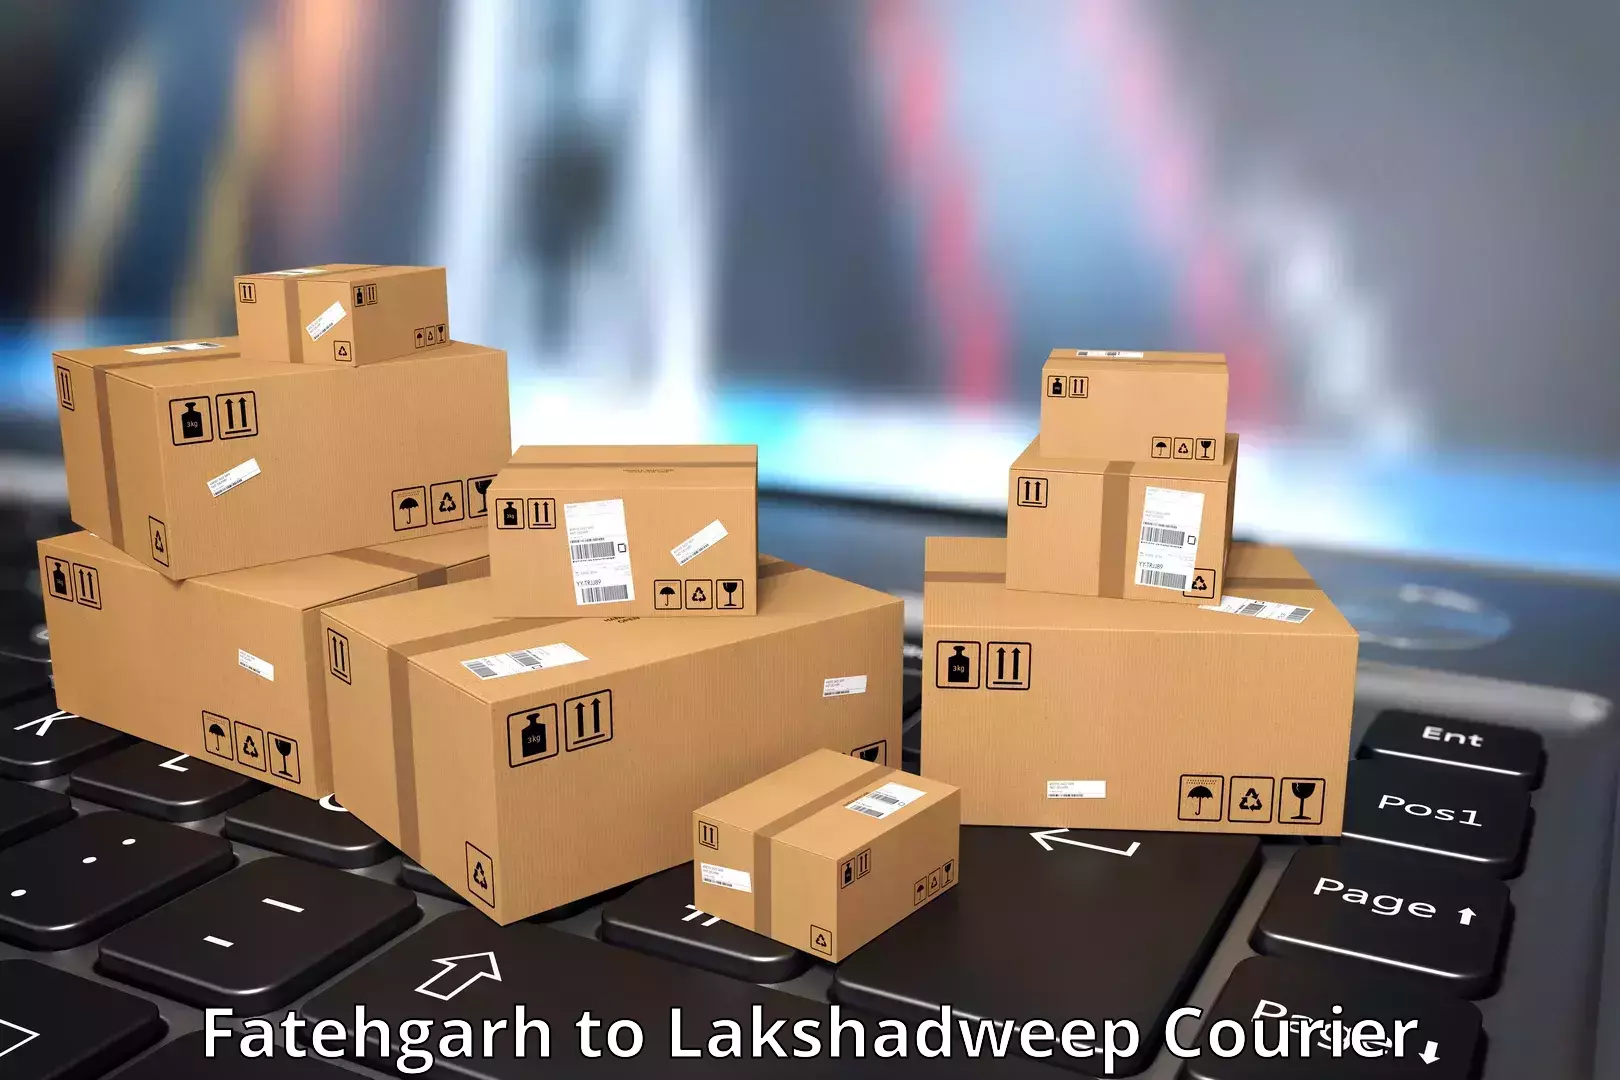 Courier service innovation Fatehgarh to Lakshadweep